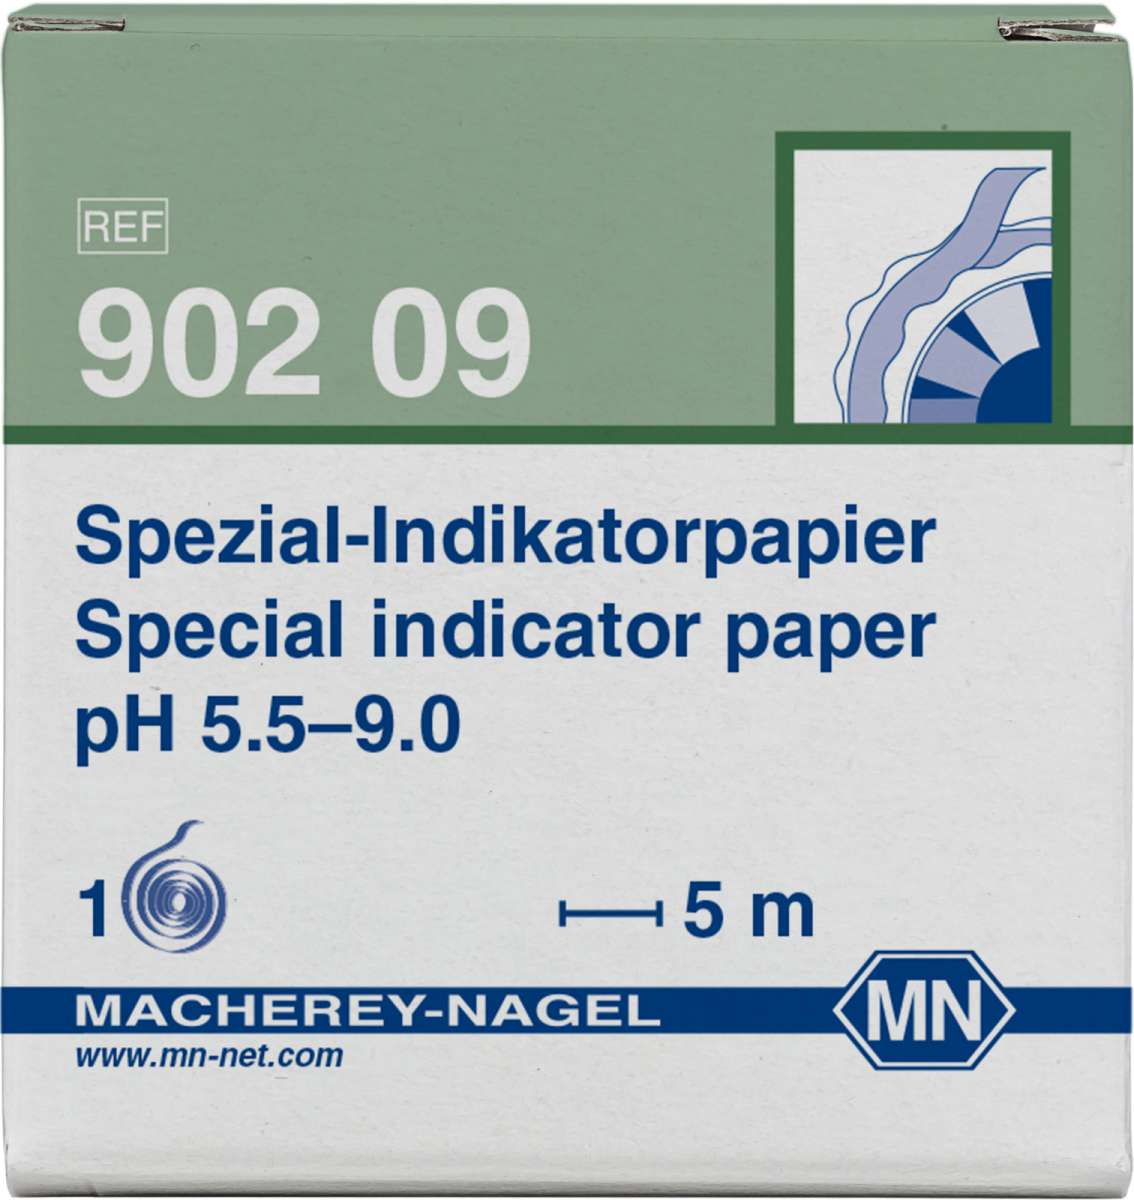 Special indicator paper pH 5.5 to 9.0 (Reel of 5m length and 7mm width)